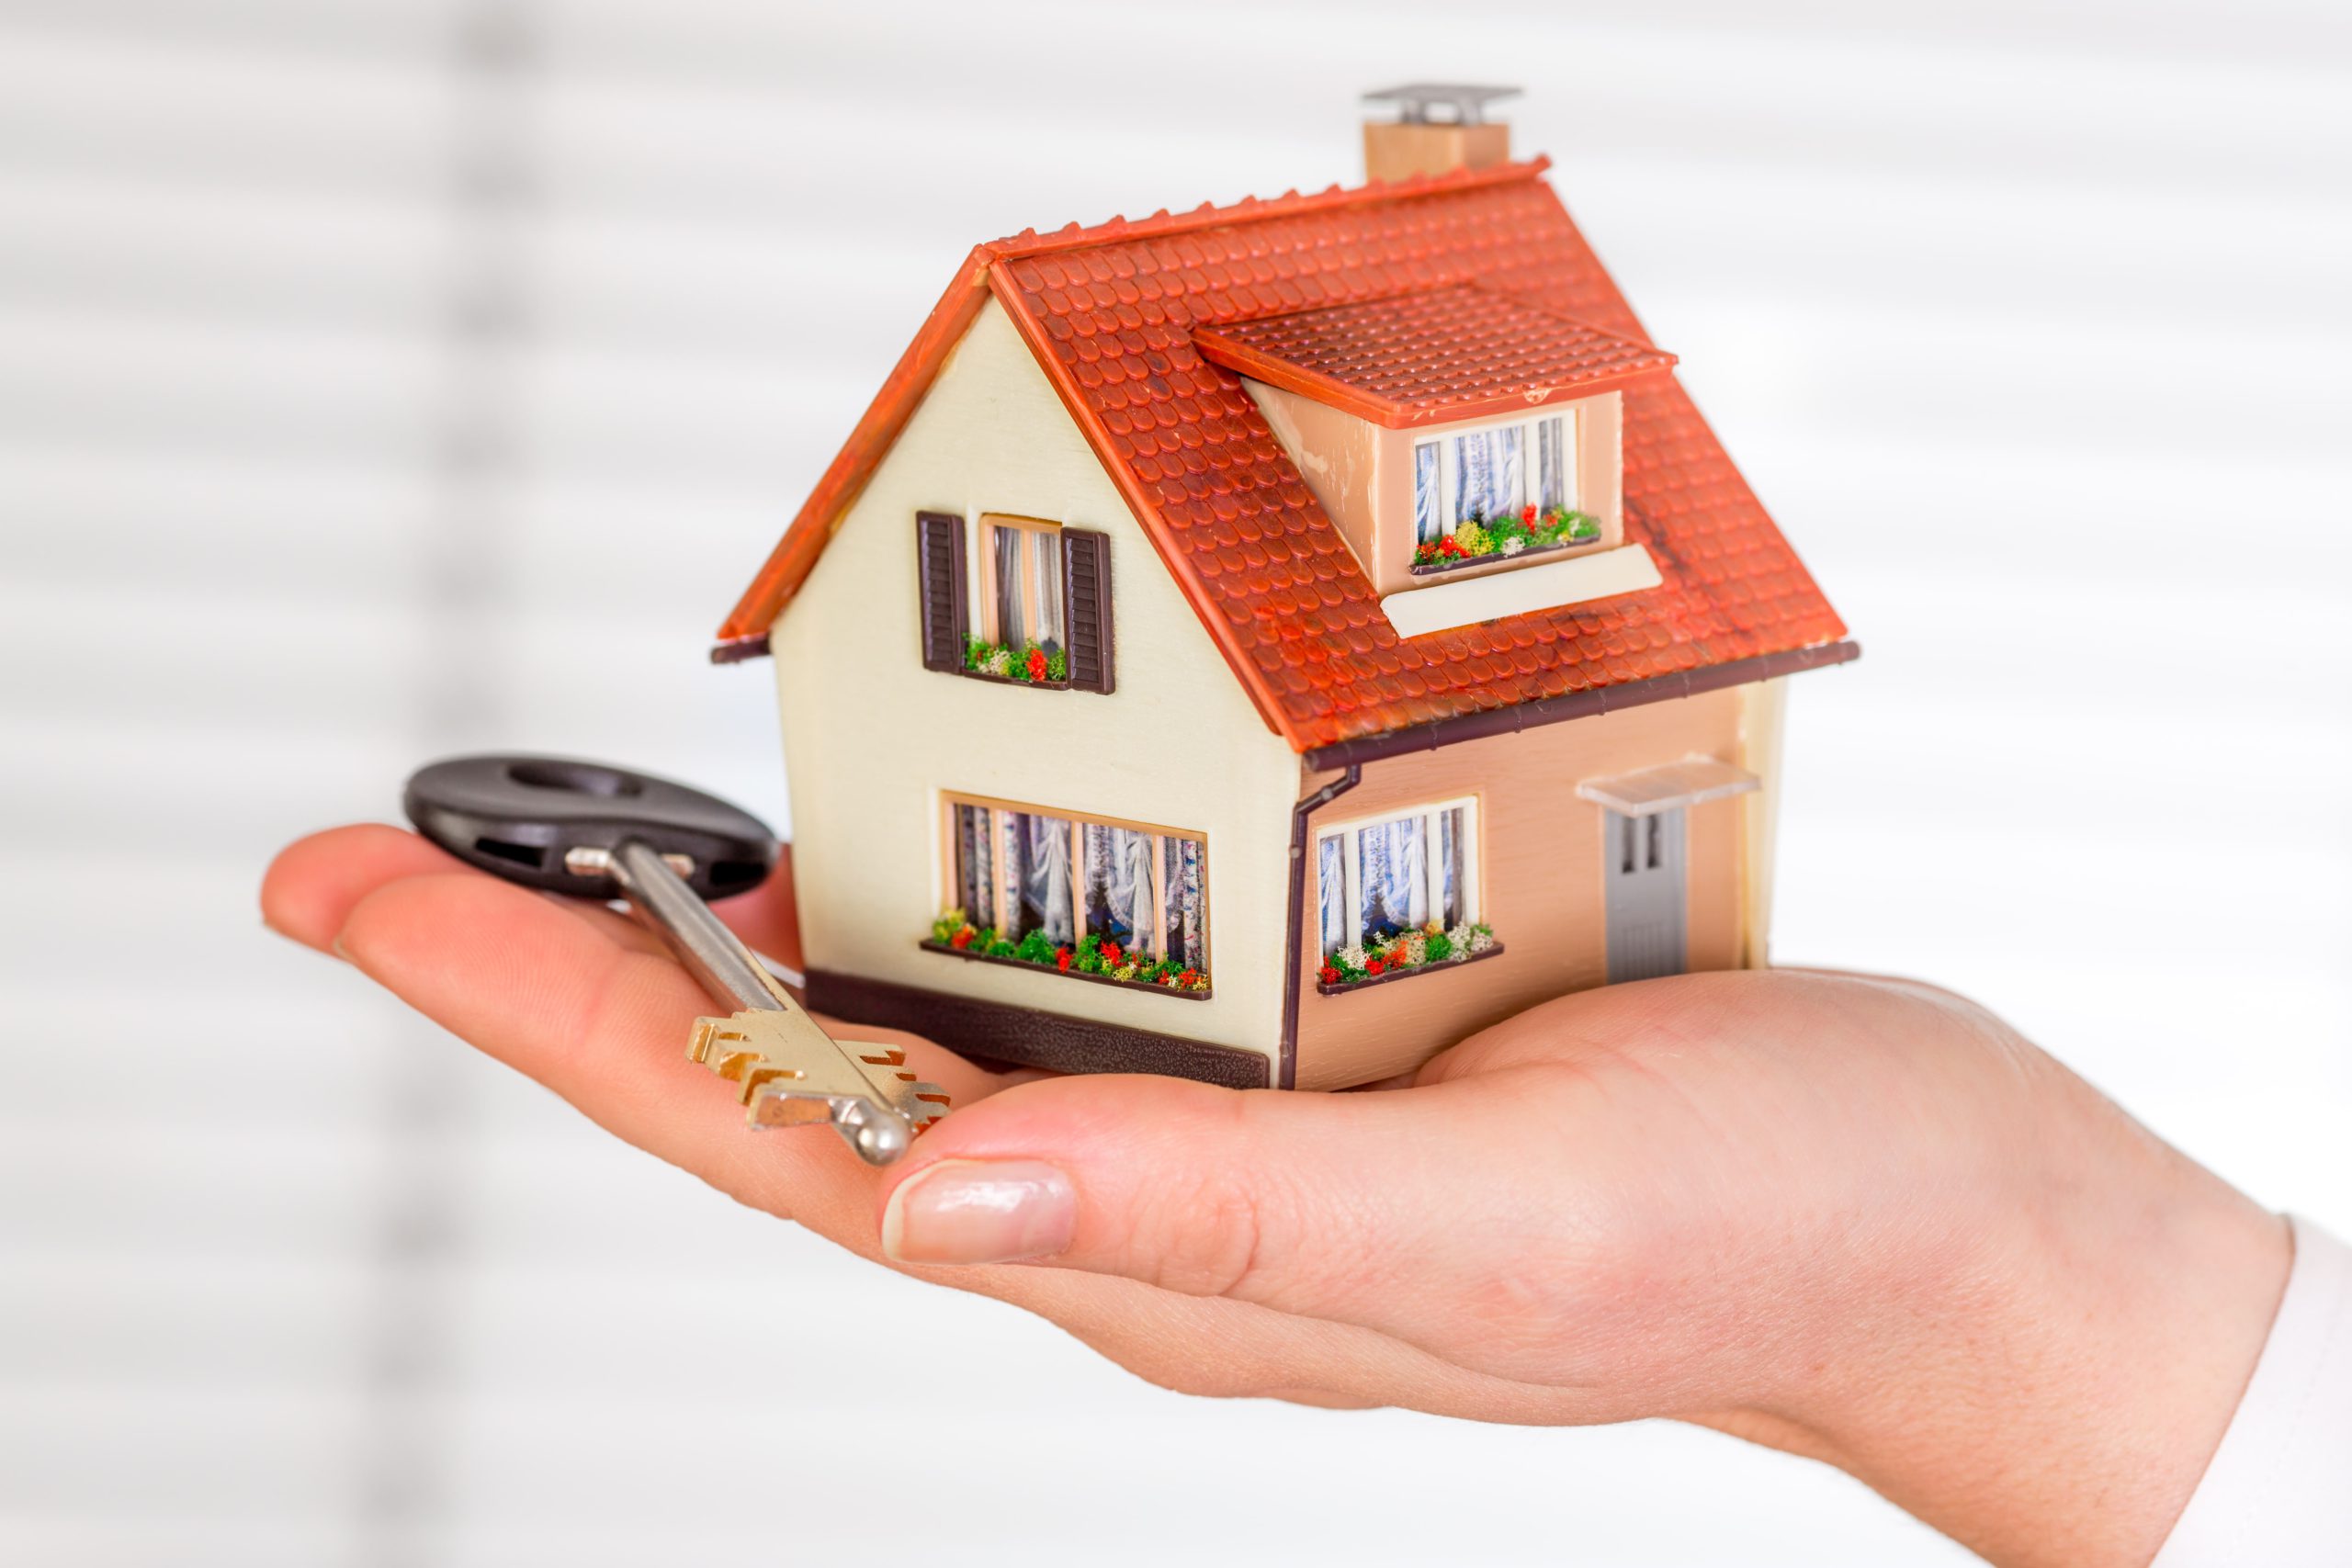 Speedy ways to sell your home quicker